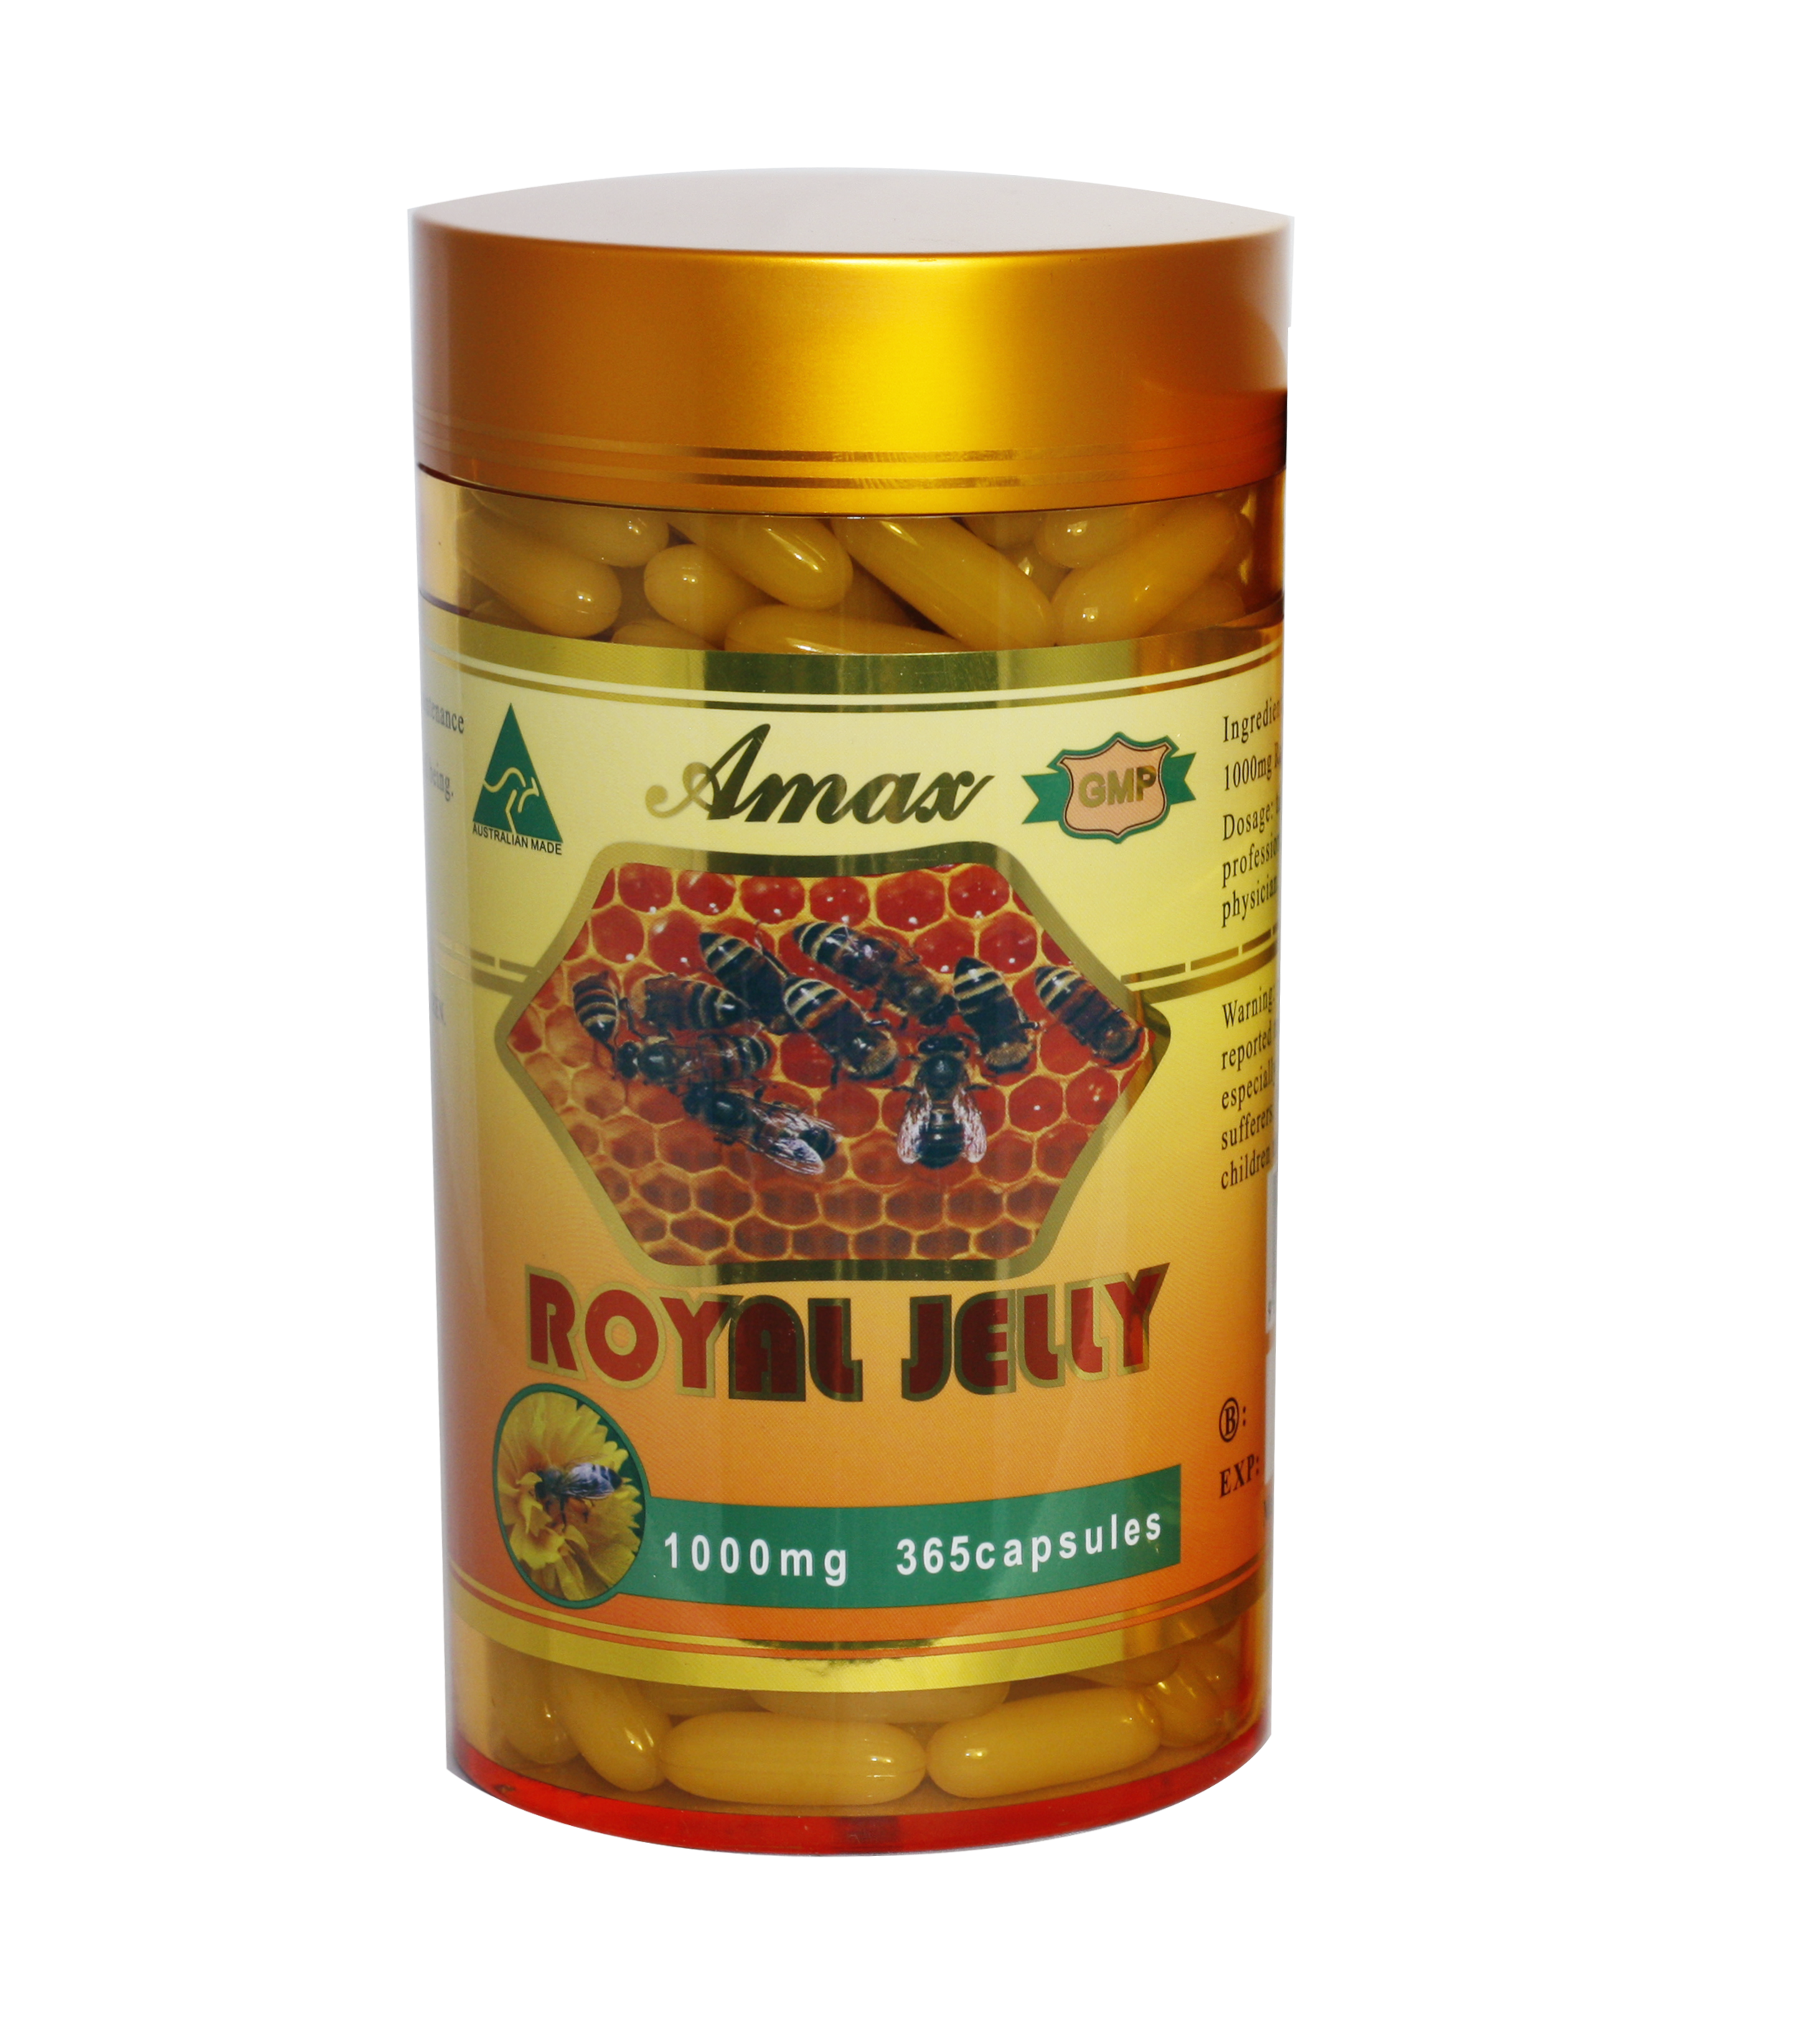 Amax royal jelly 365s